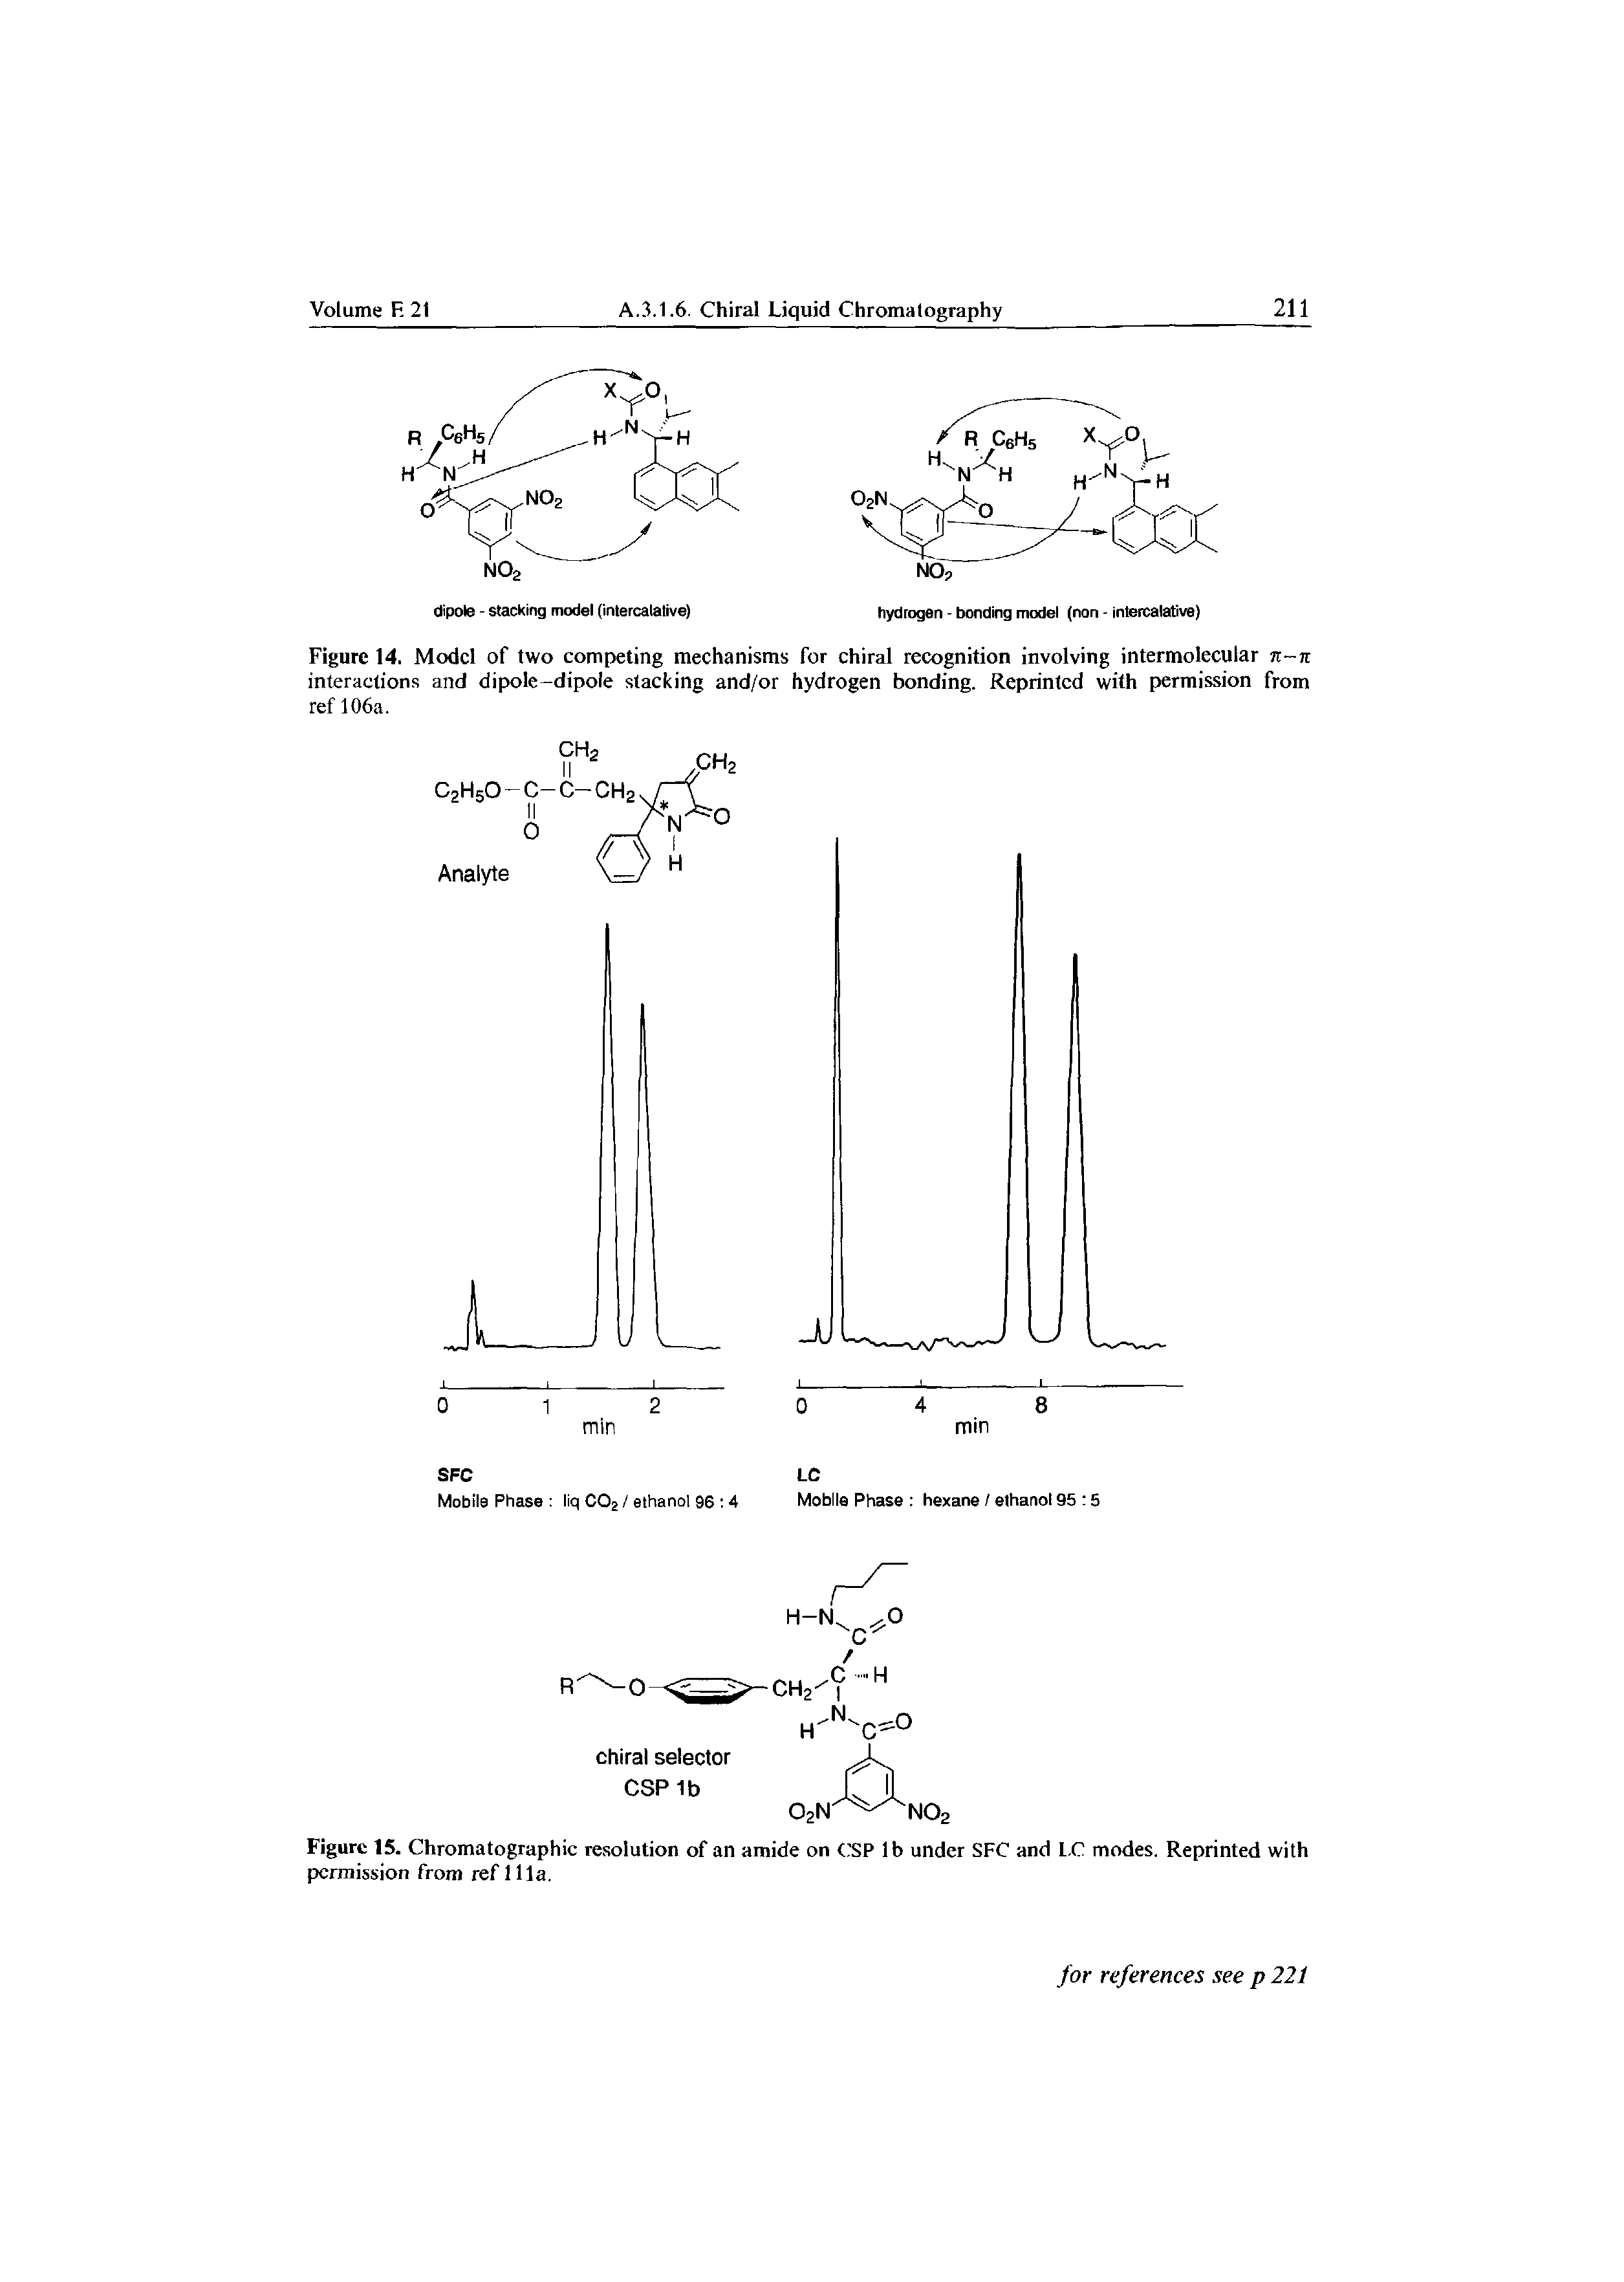 Figure 14. Model of two competing mechanisms for chiral recognition involving intermolecular rc-n interactions and dipole-dipole stacking and/or hydrogen bonding. Reprinted with permission from...